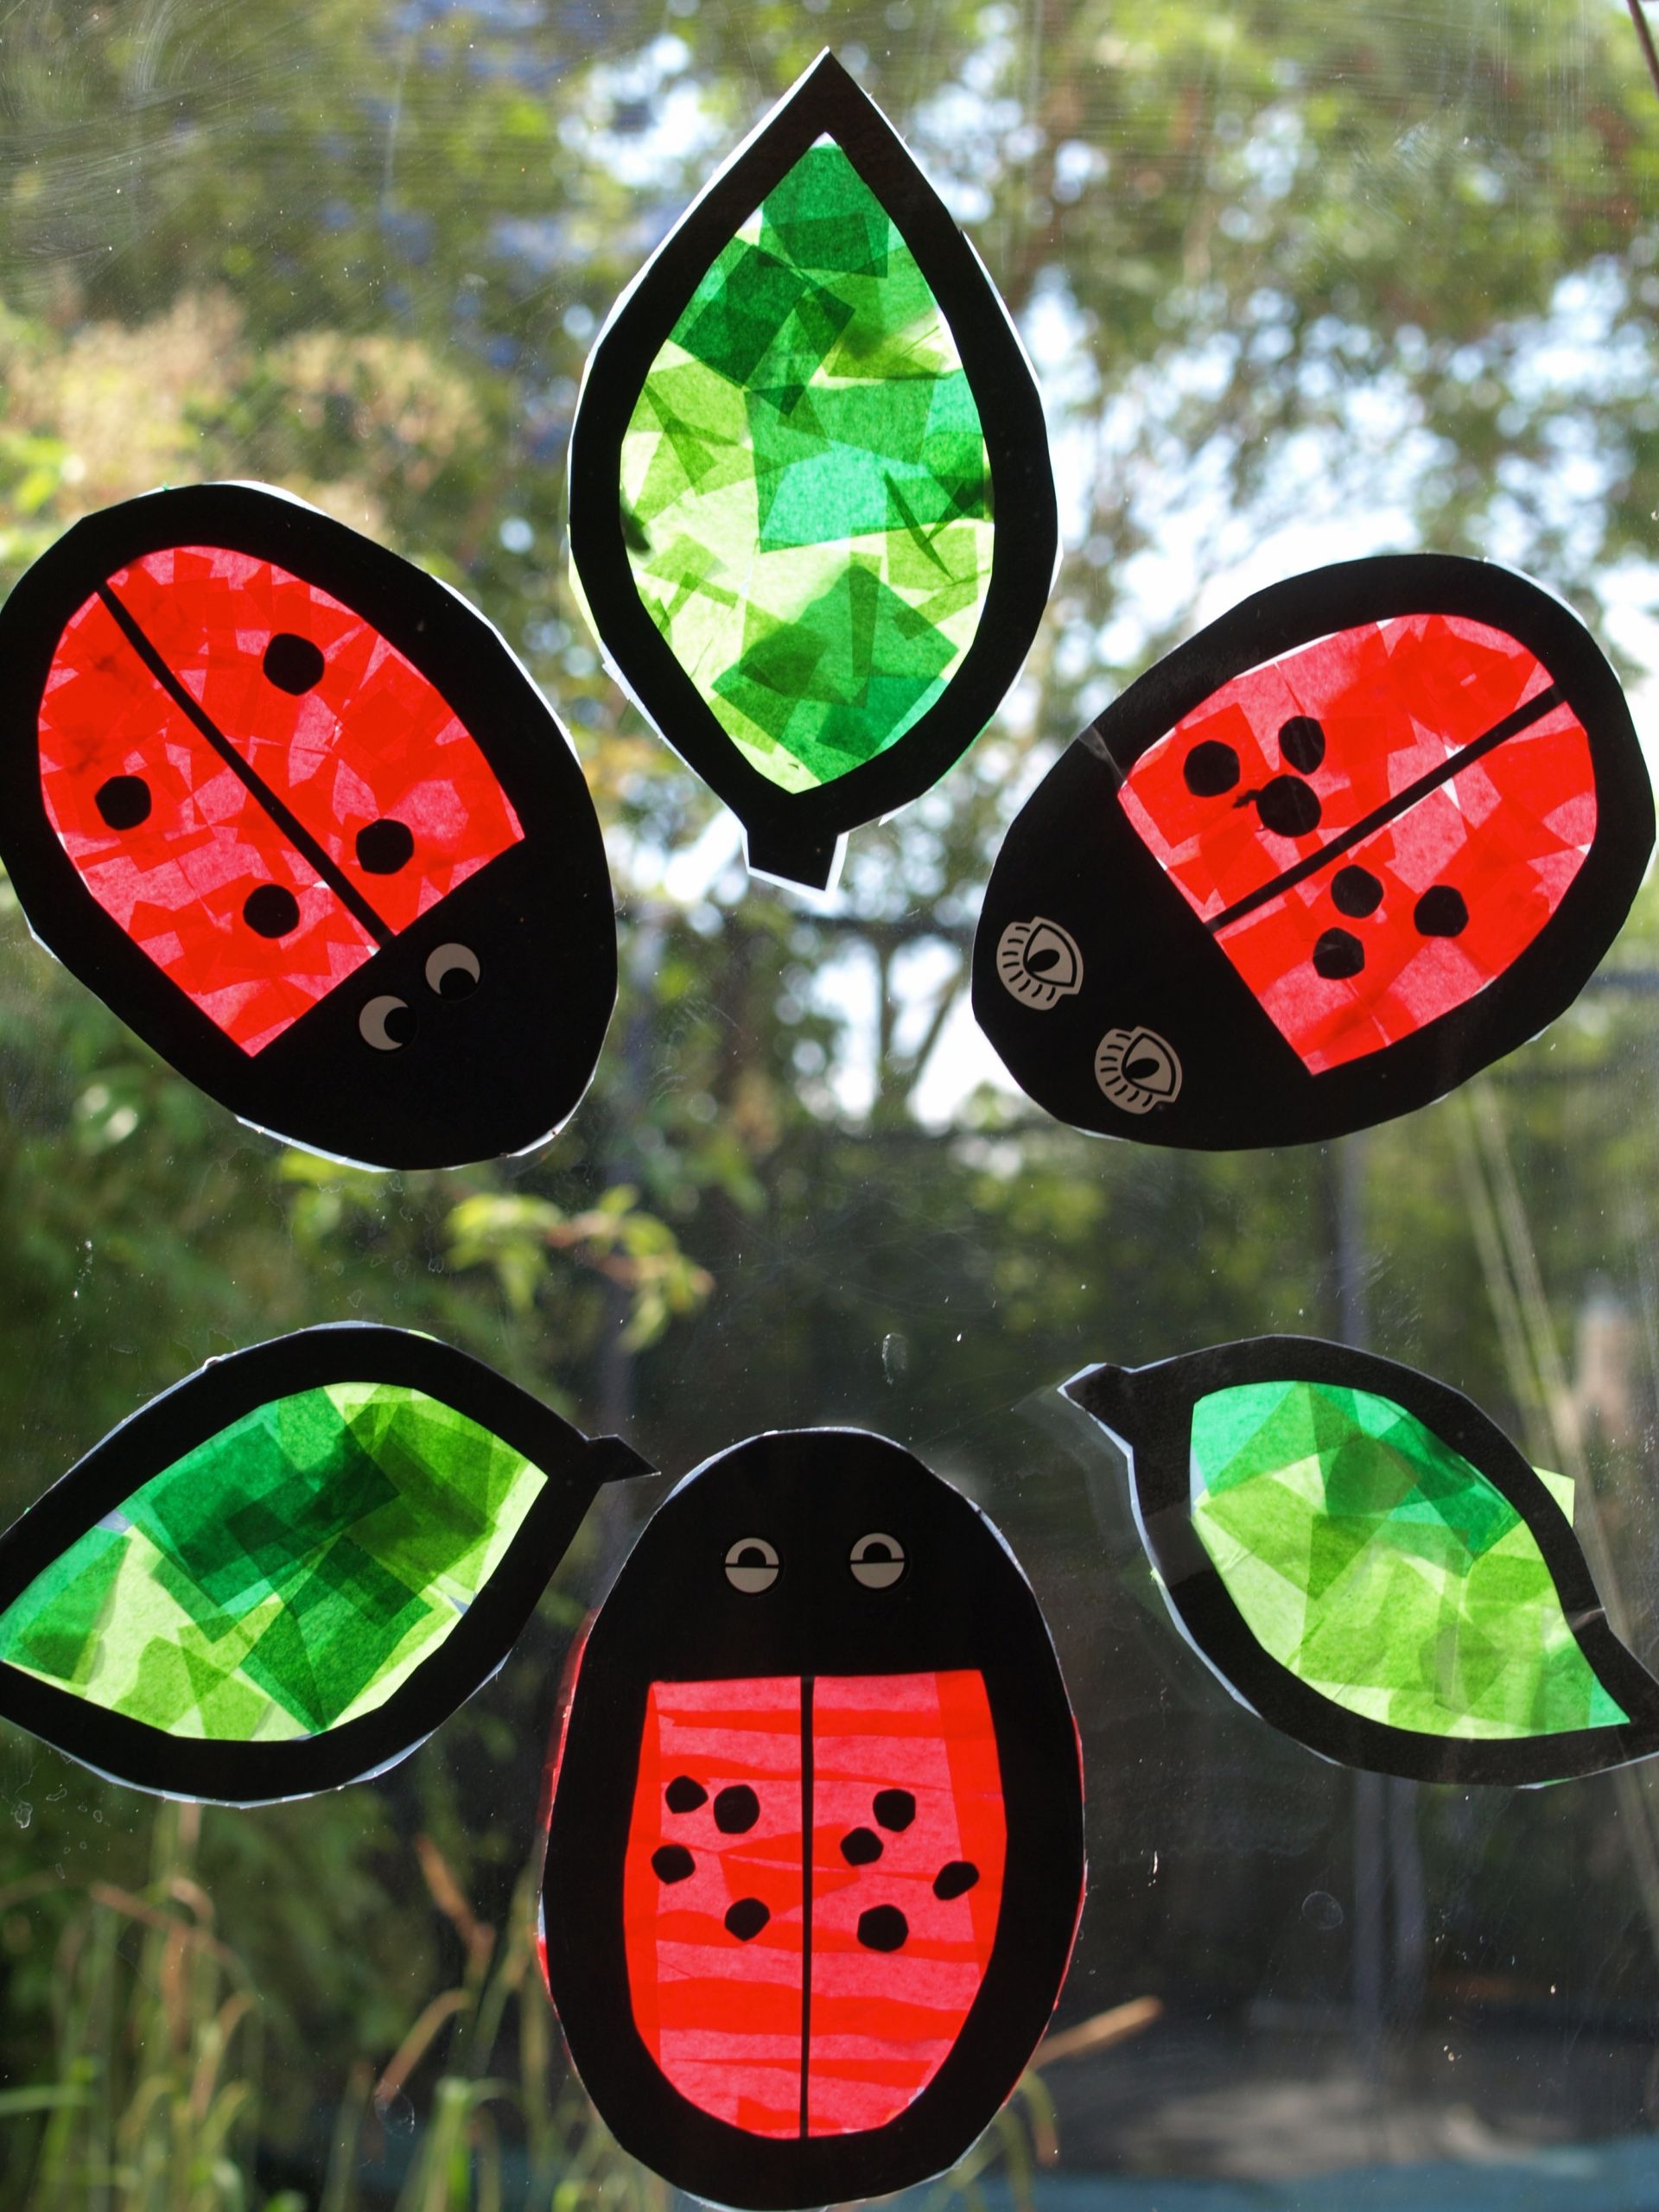 Fun Crafts For Preschoolers
 Over 20 Easy to Make Crafts for Kids That Wel e Spring